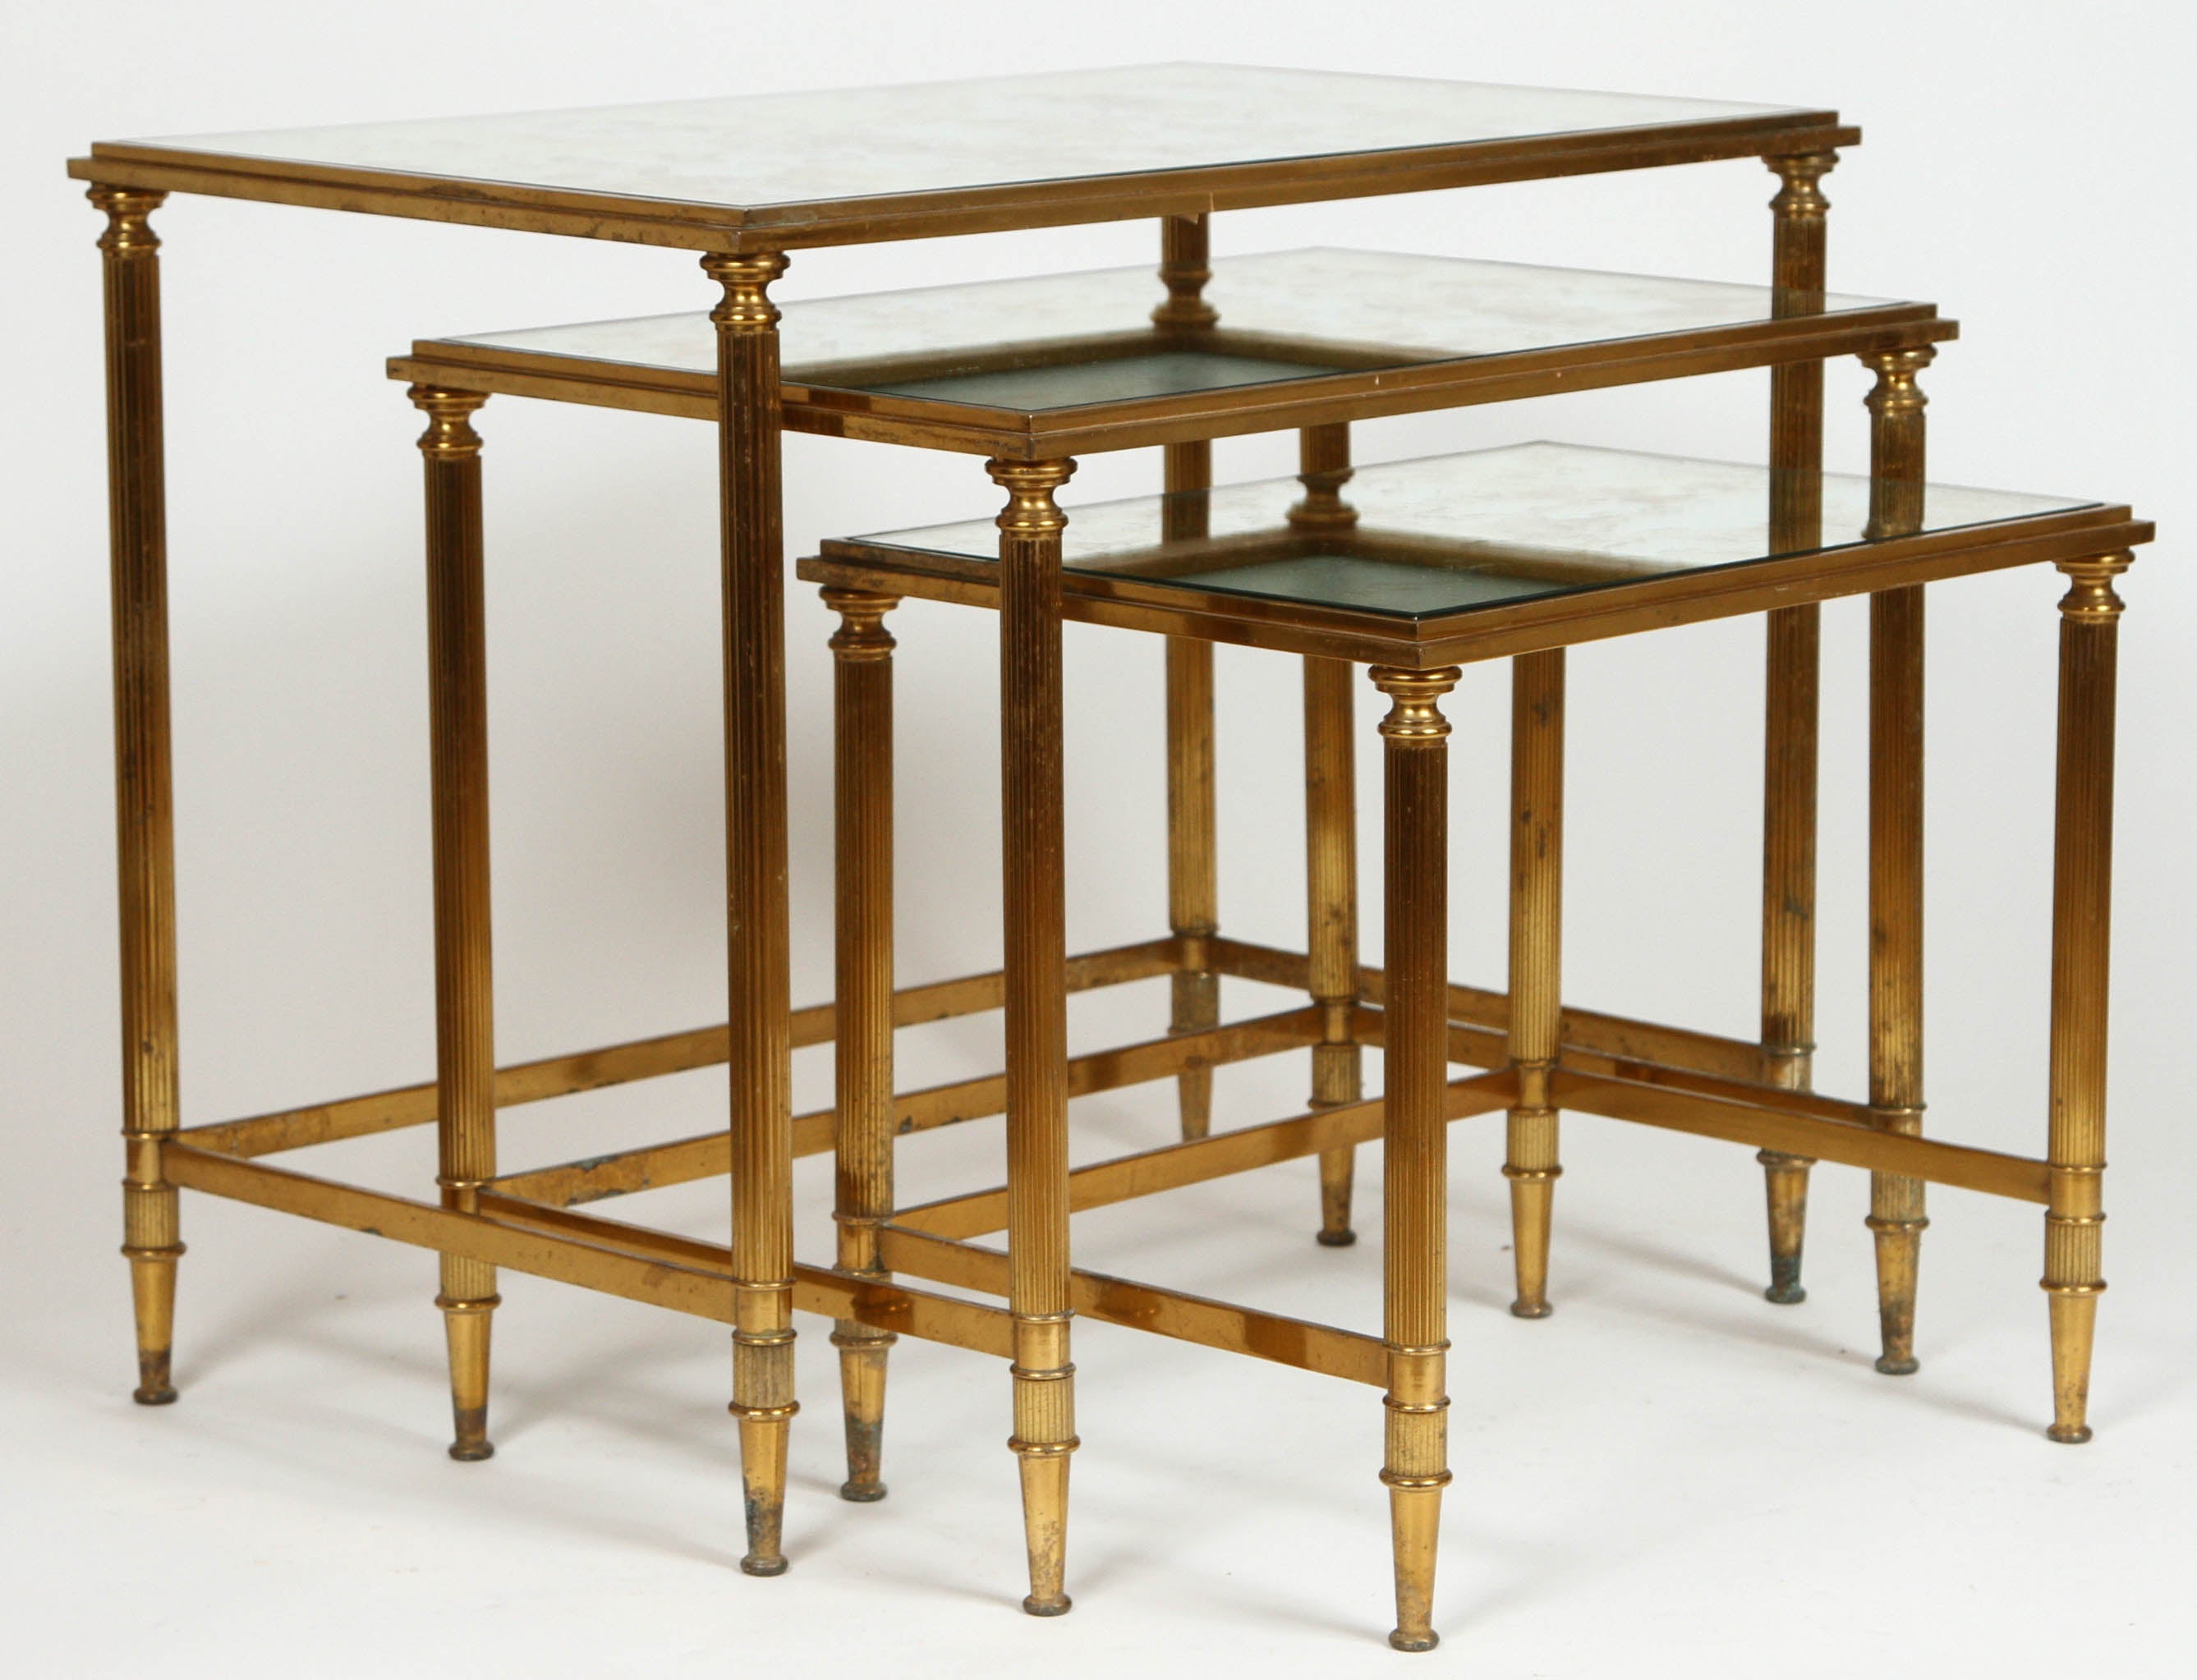 Vintage Maison Jansen bronze nesting tables with original mirrored tops. Set of three tables feature fluted column legs. Made in France, circa 1950-1970.

Dimensions:
L: 17 3/4